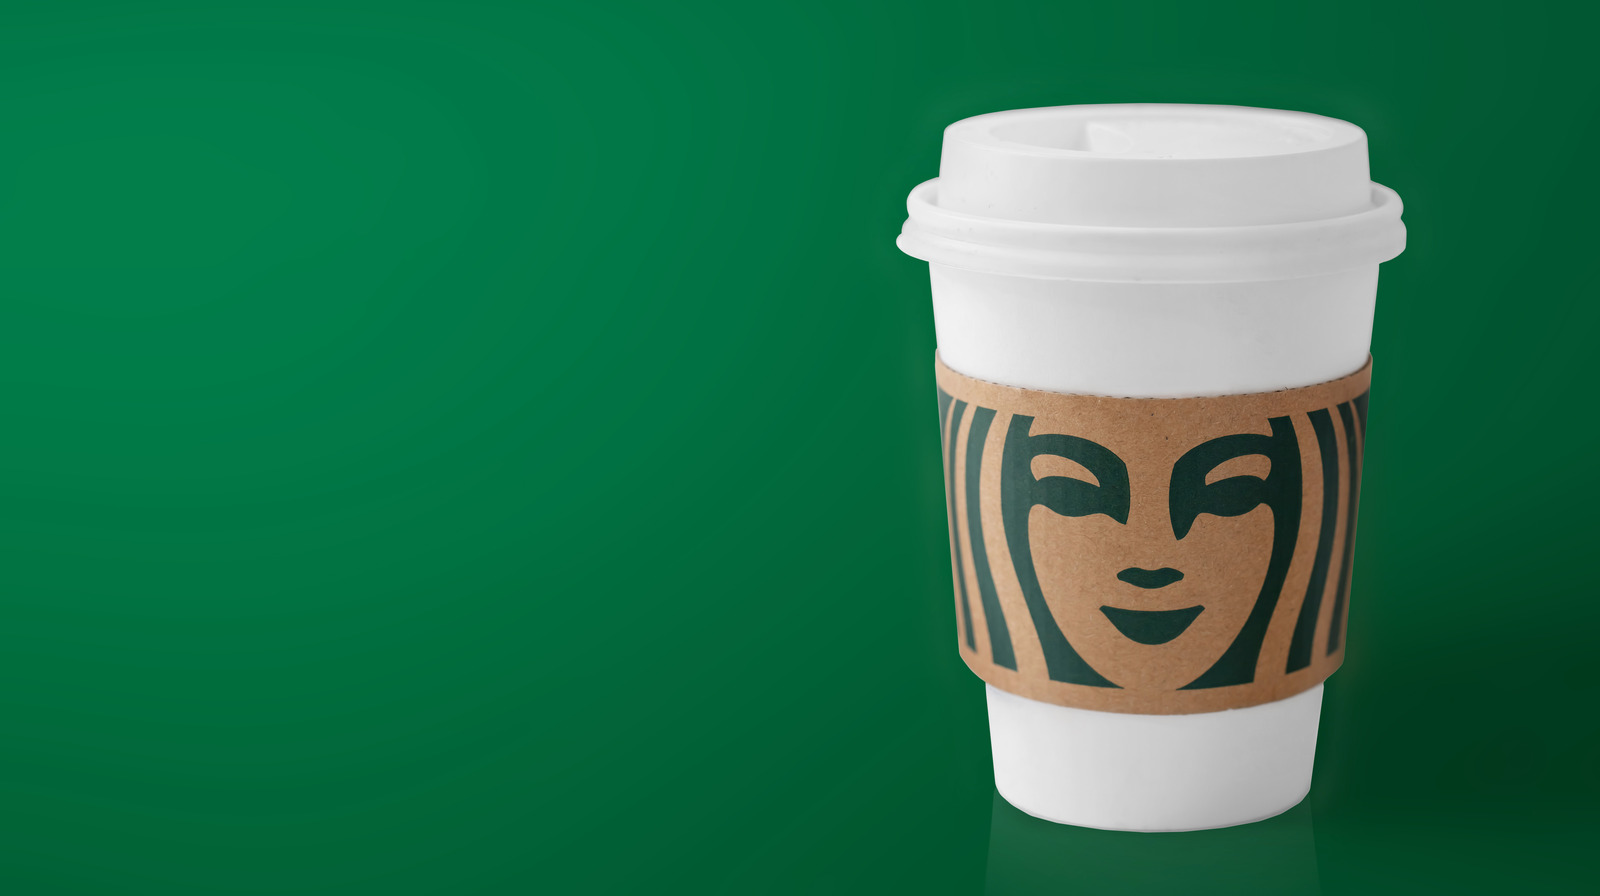 How a Topless Mermaid Made the Starbucks Cup an Icon